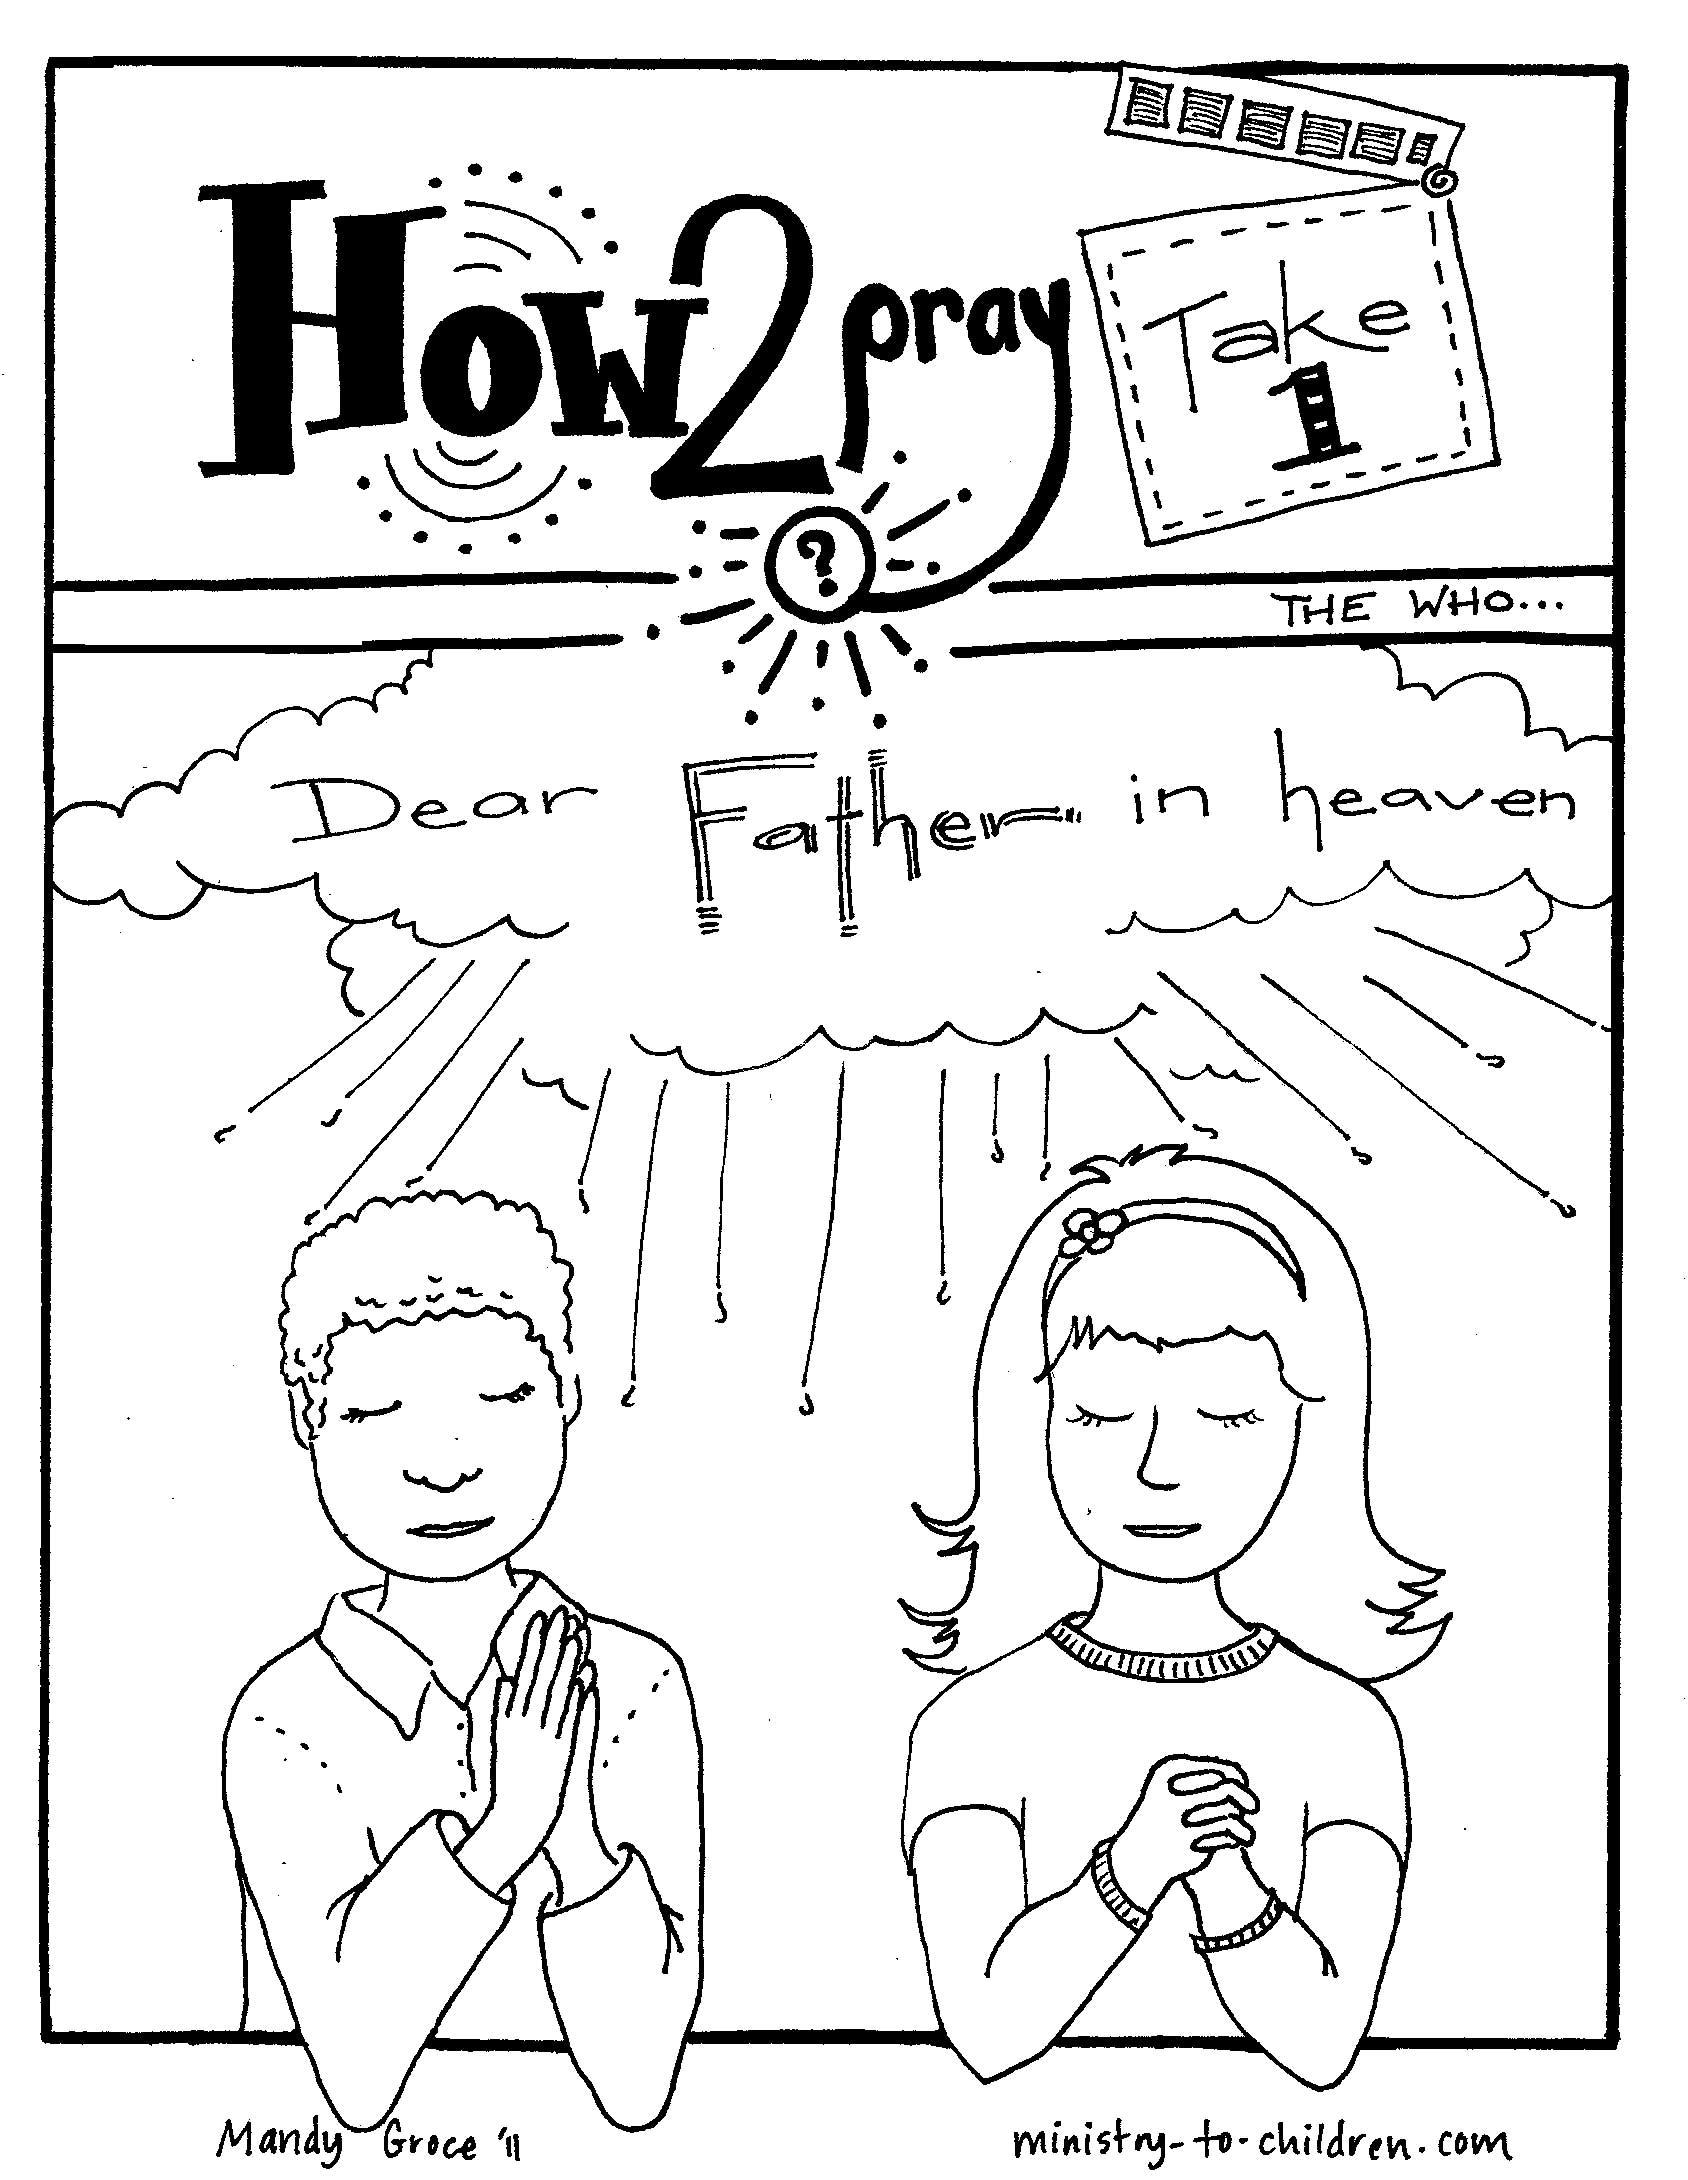 The lords prayer coloring book for kids free pages download only